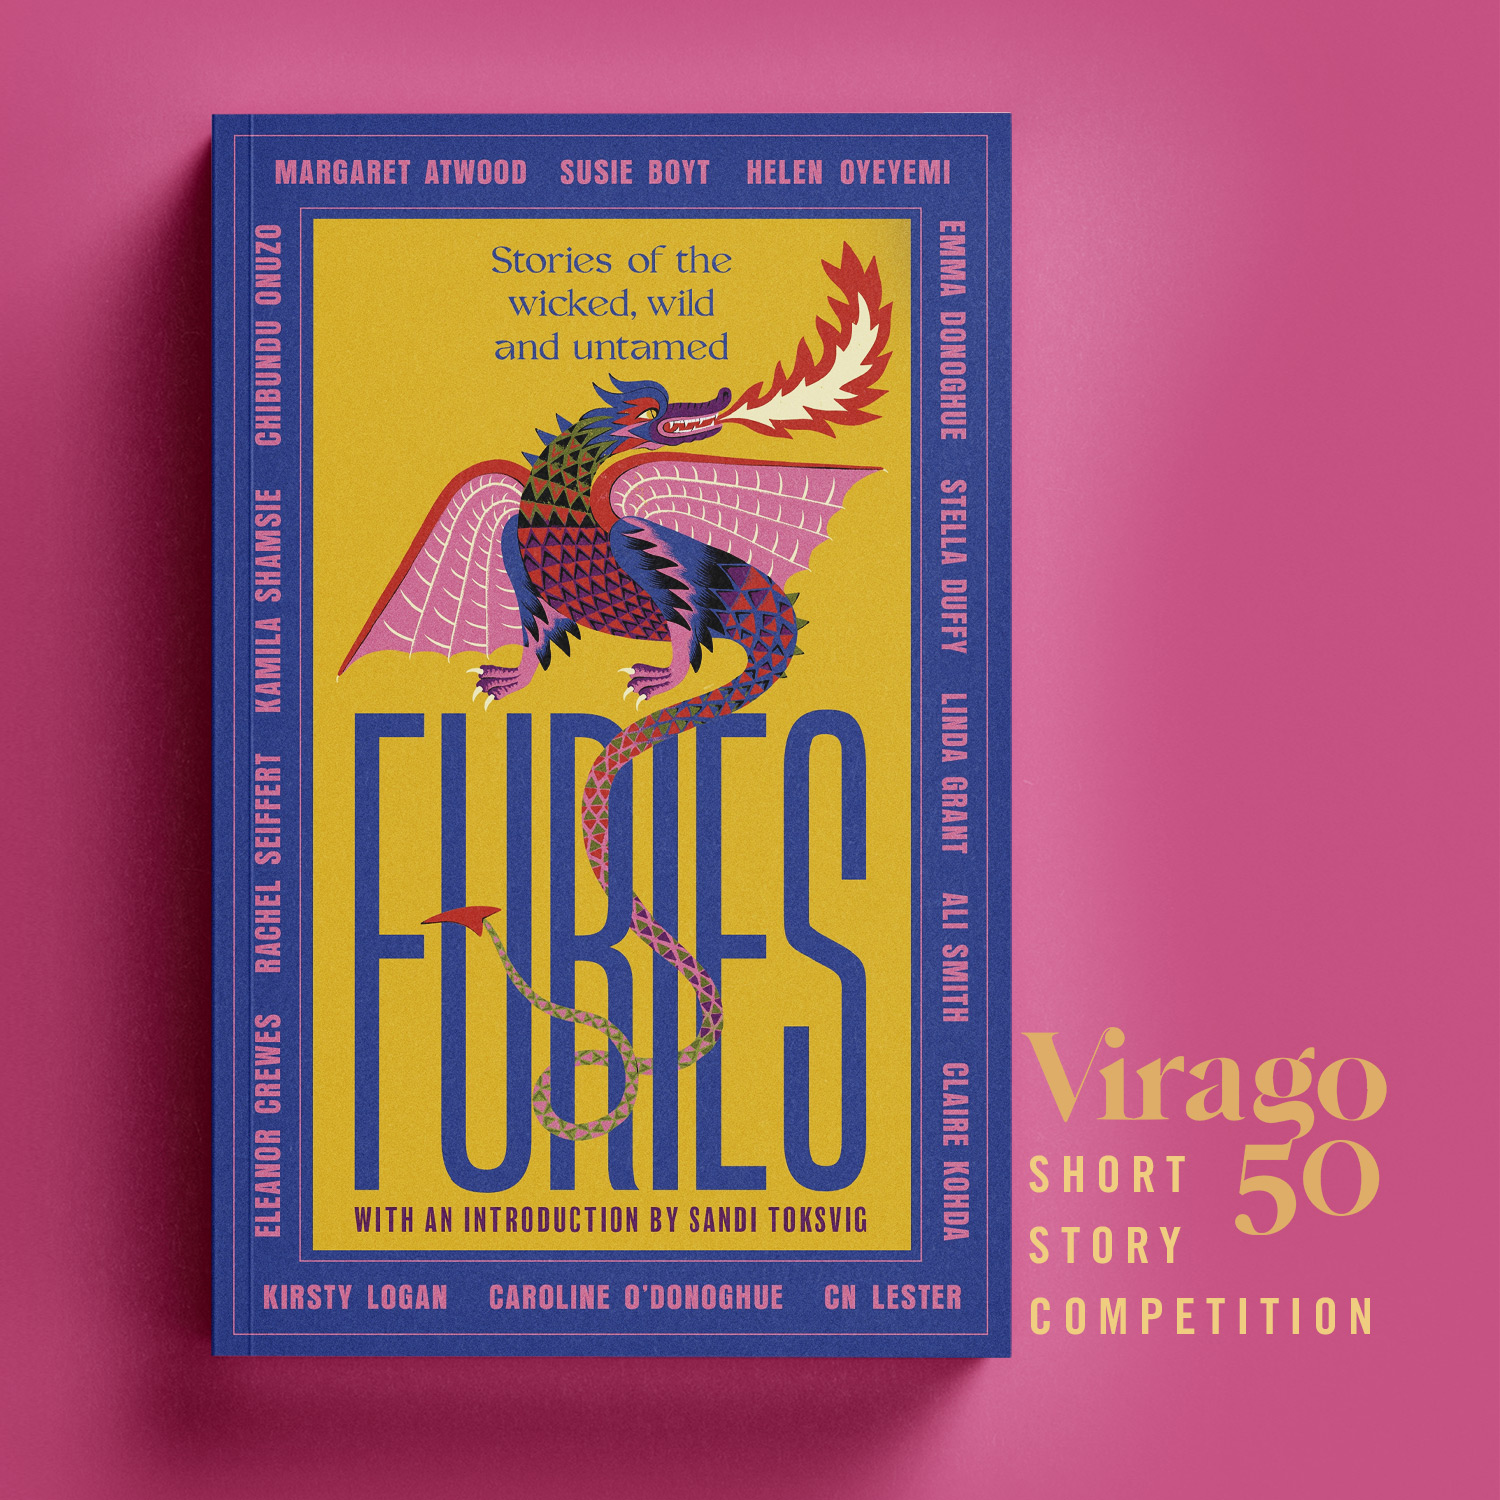 The Virago 50th Furies Short Story Competition